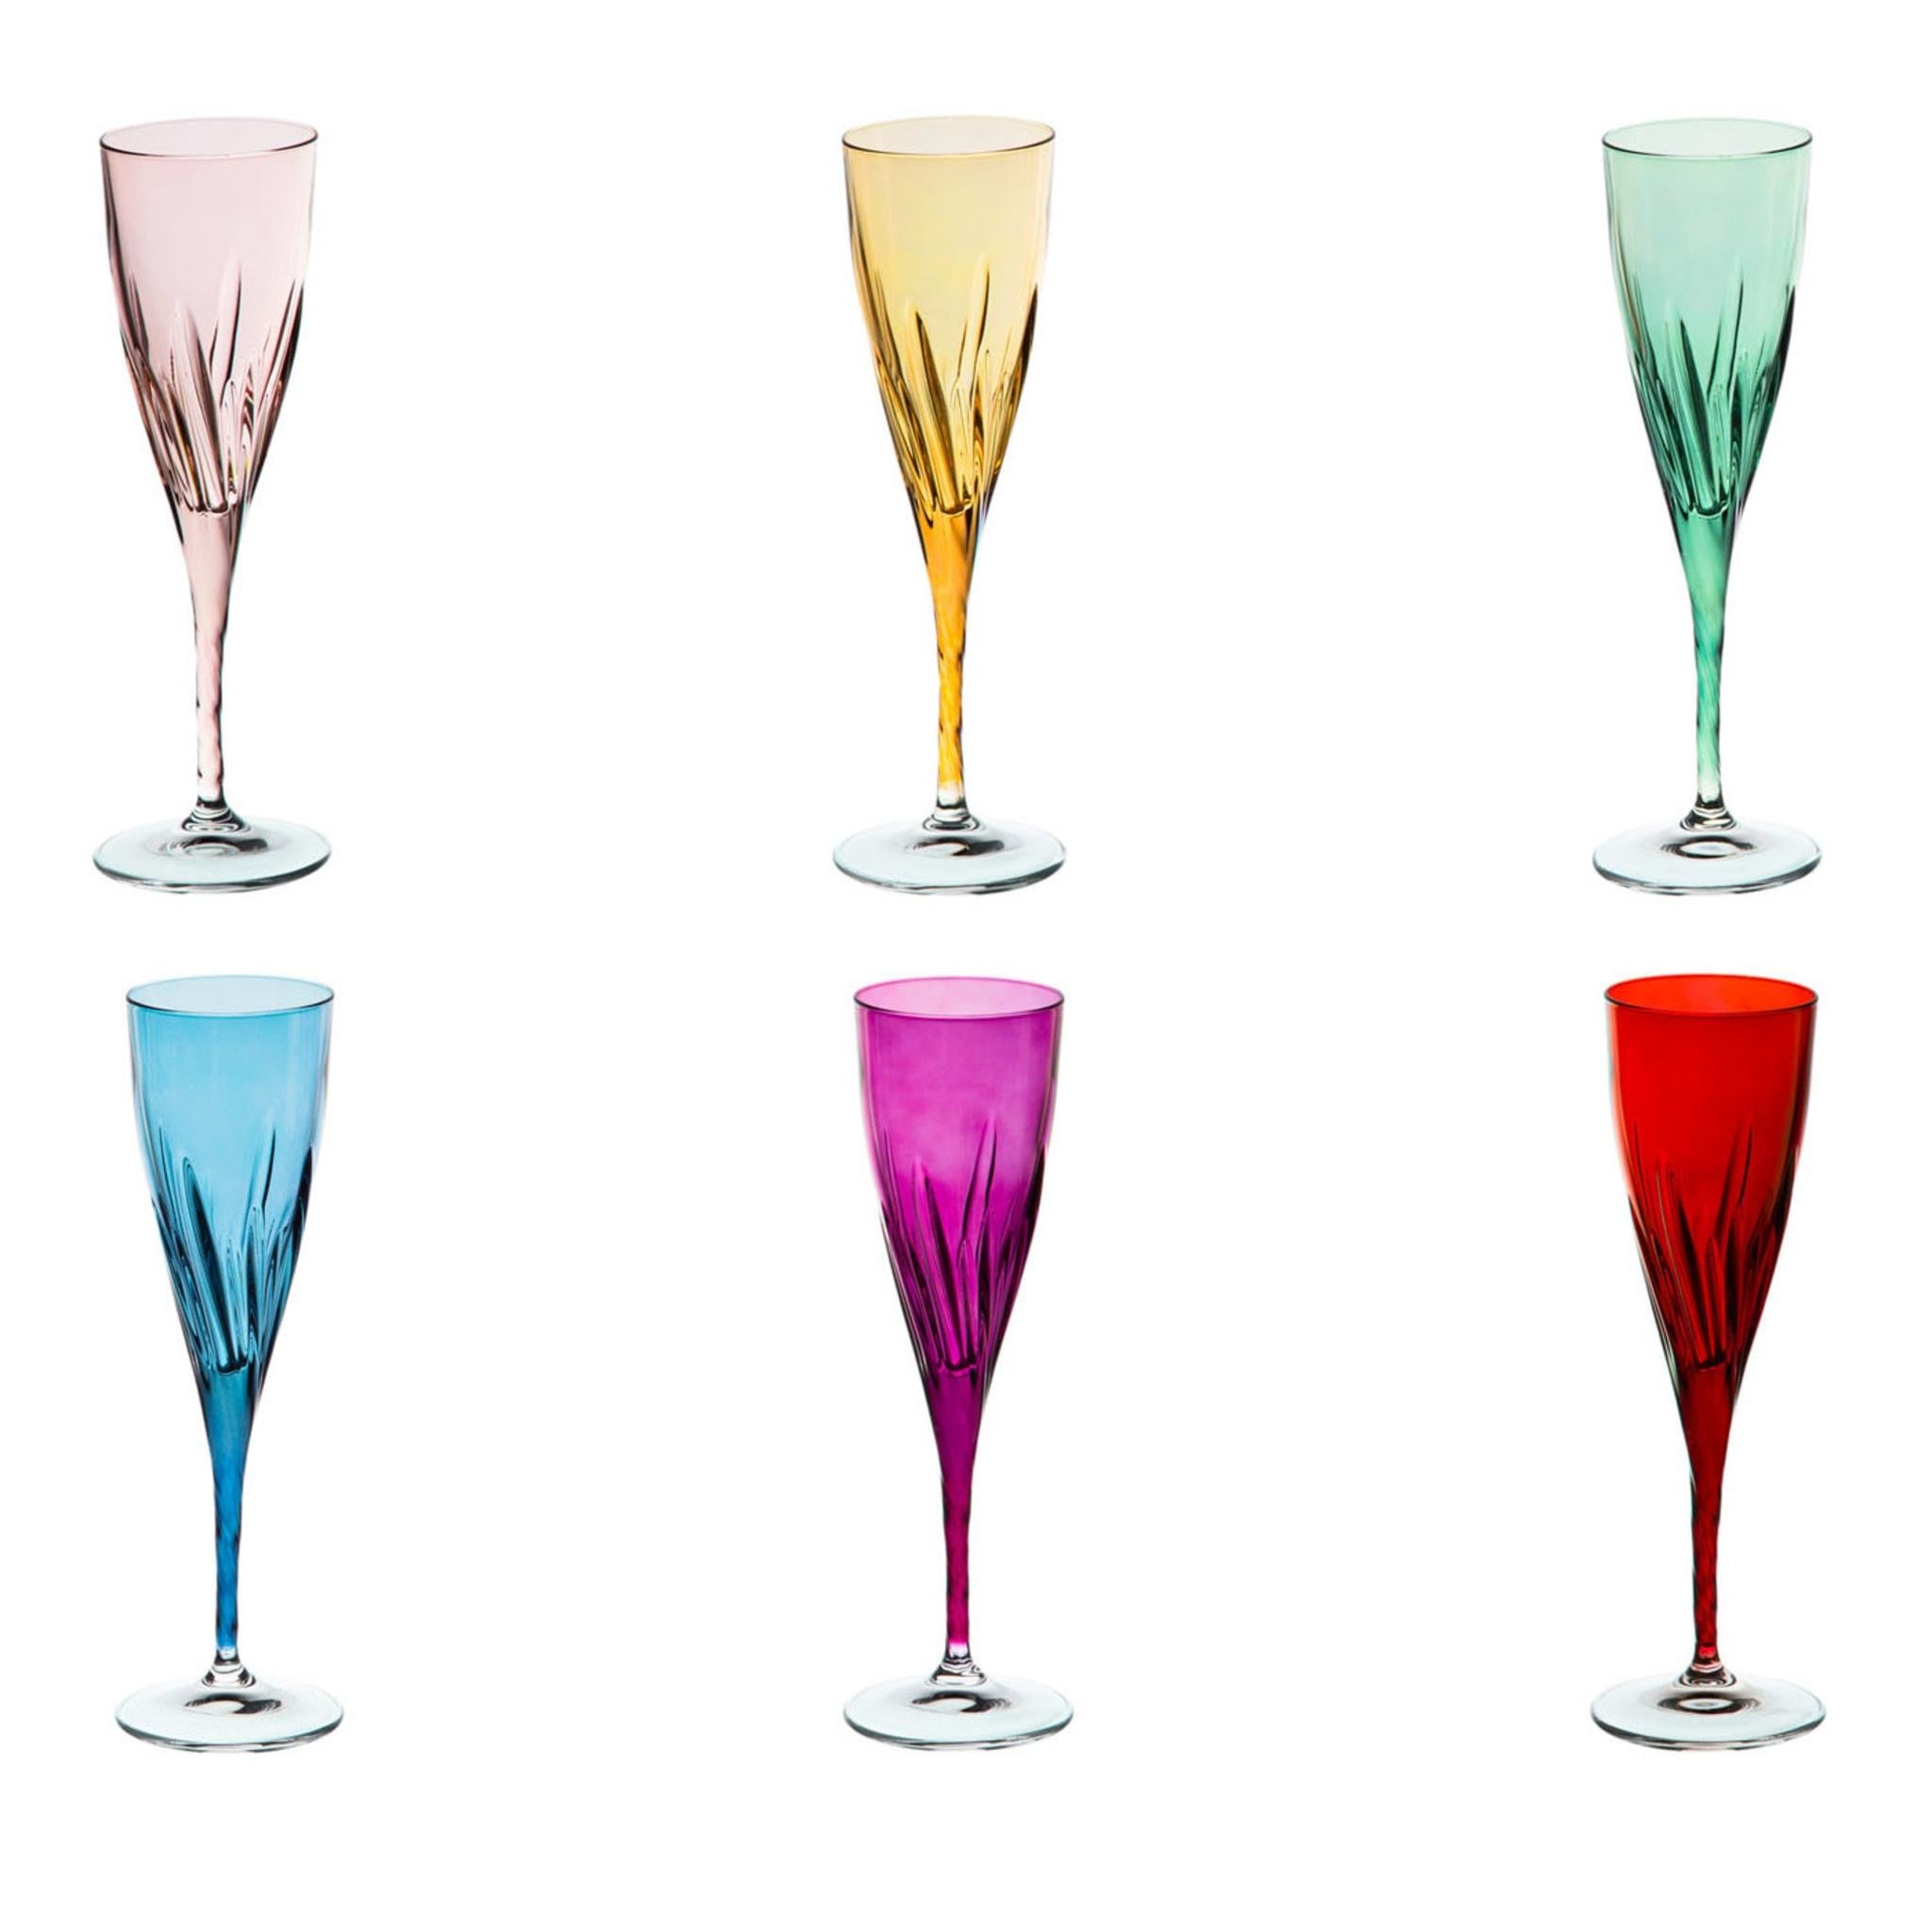 This stunning champagne flute set is part of the Club collection. Each piece was crafted of glass and decorated by hand, boasting a transparent round foot supporting a stem and bowl with striking creases to add a textural decoration. The individual